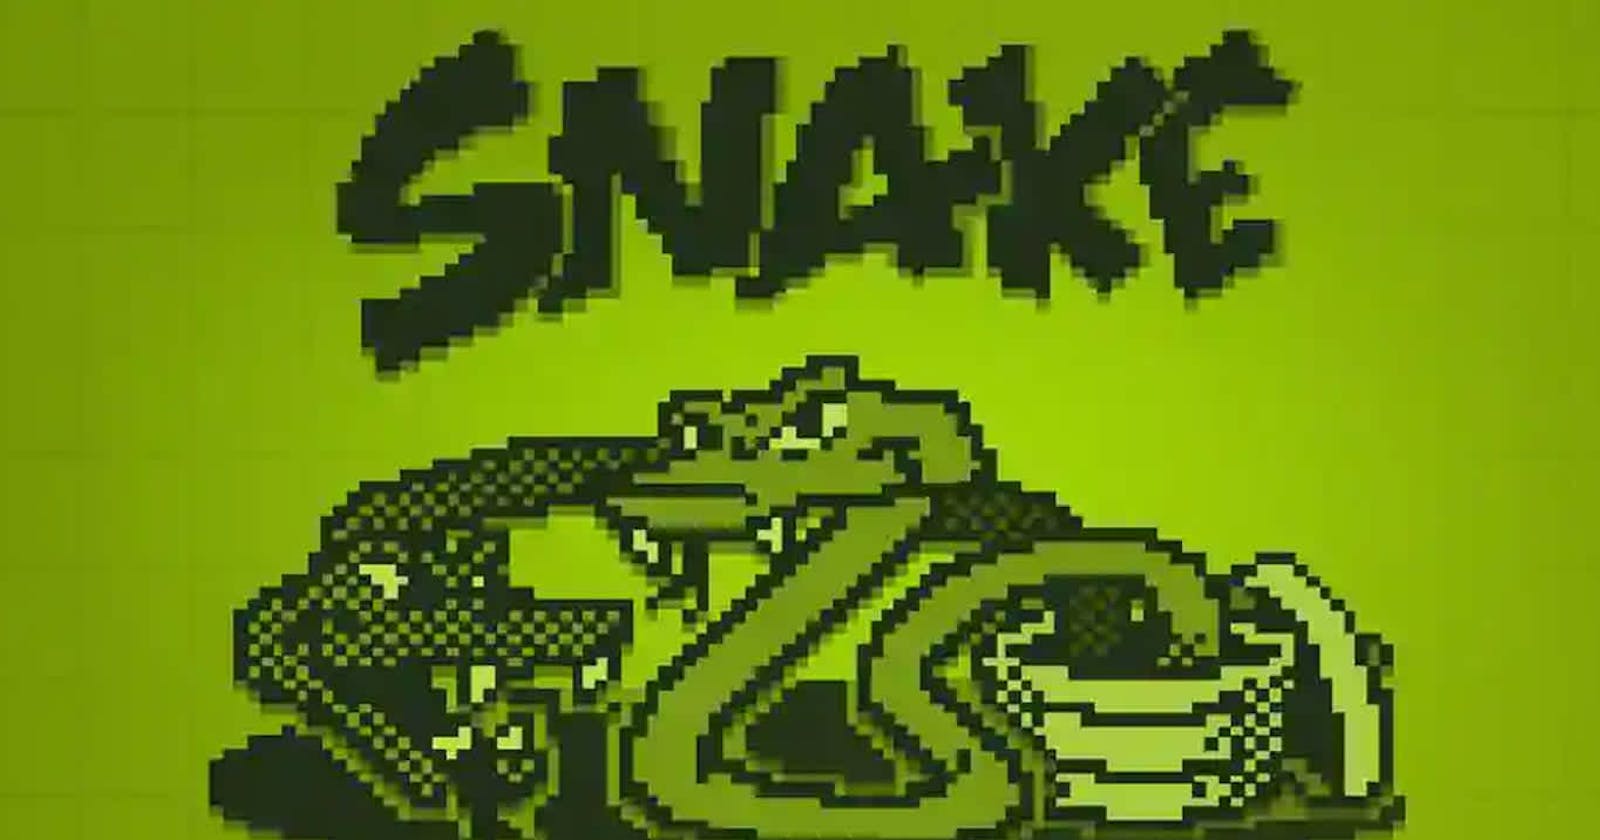 How freeCodeCamp’s Basic JavaScript Lessons can be Applied on the Snakes Game.